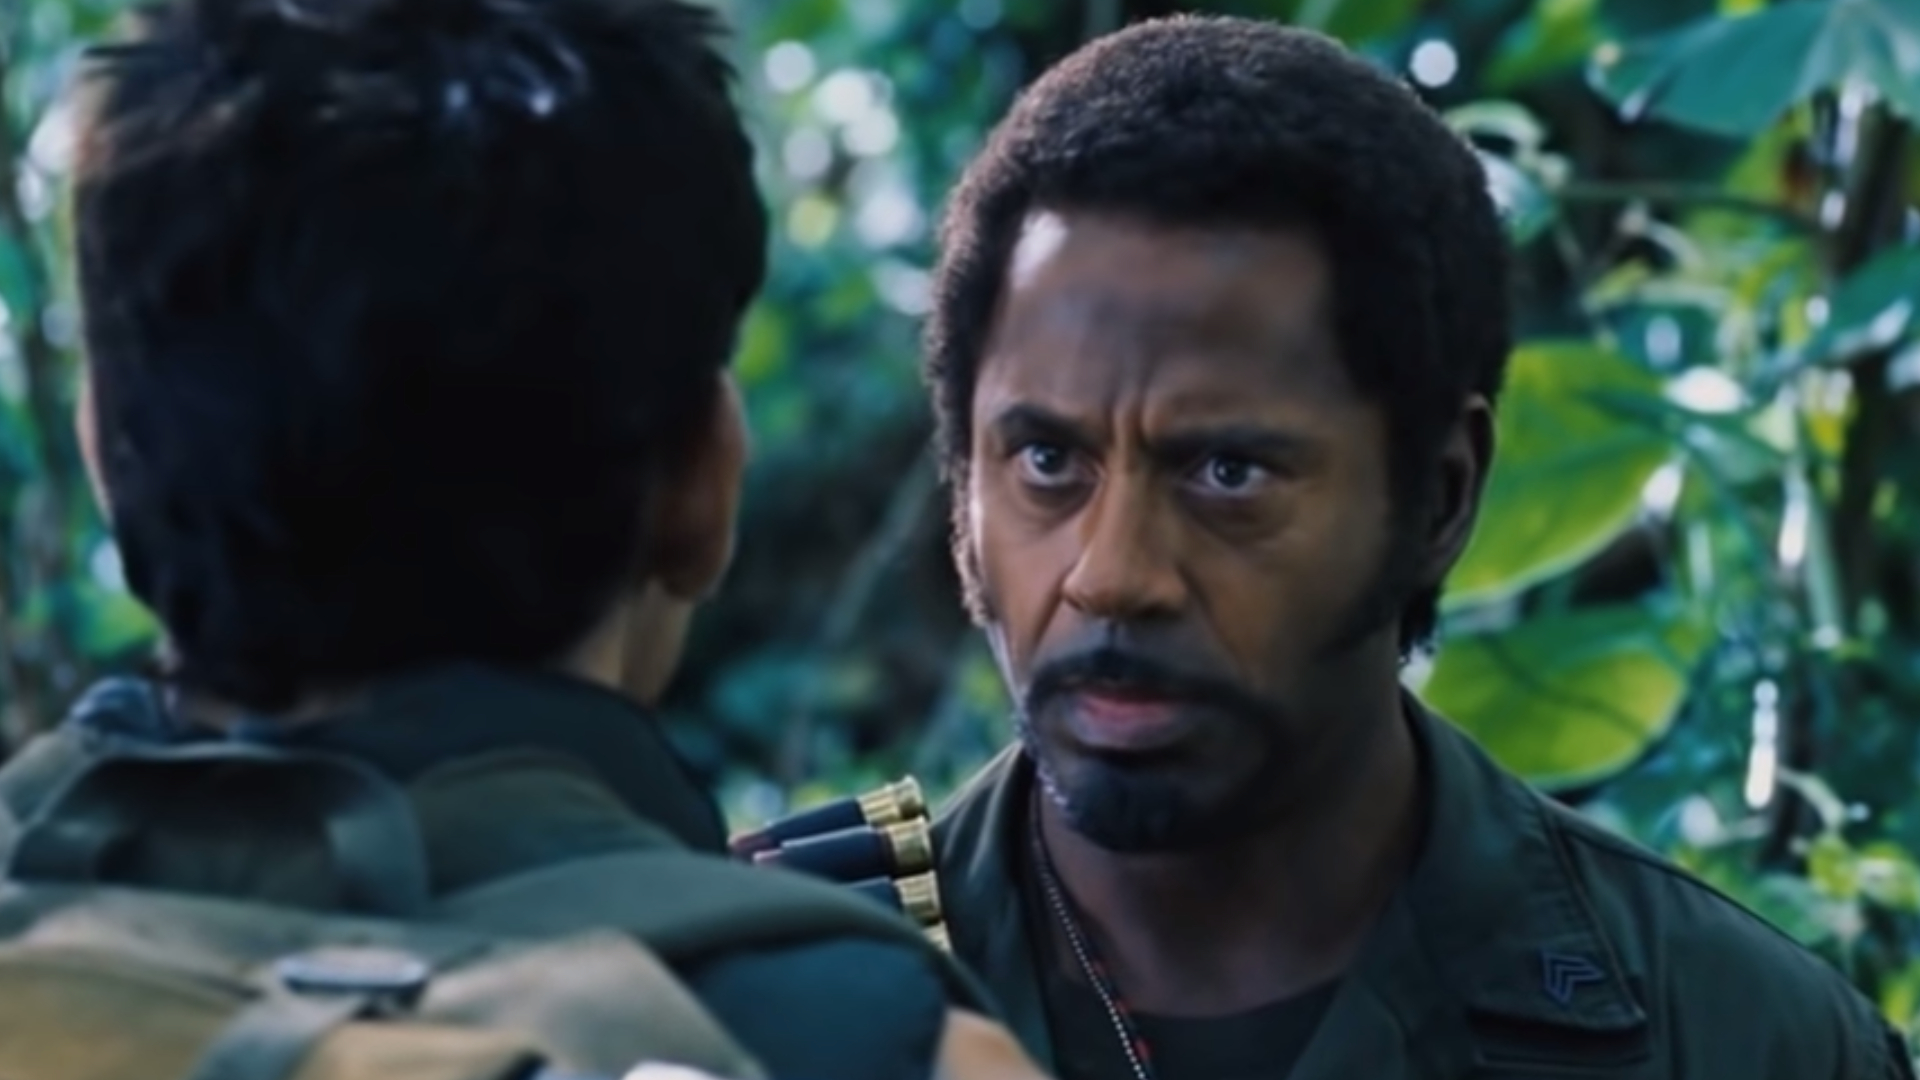 The Internet's Offended After Just Discovering Robert Downey Jr.'s Tropic Thunder Role